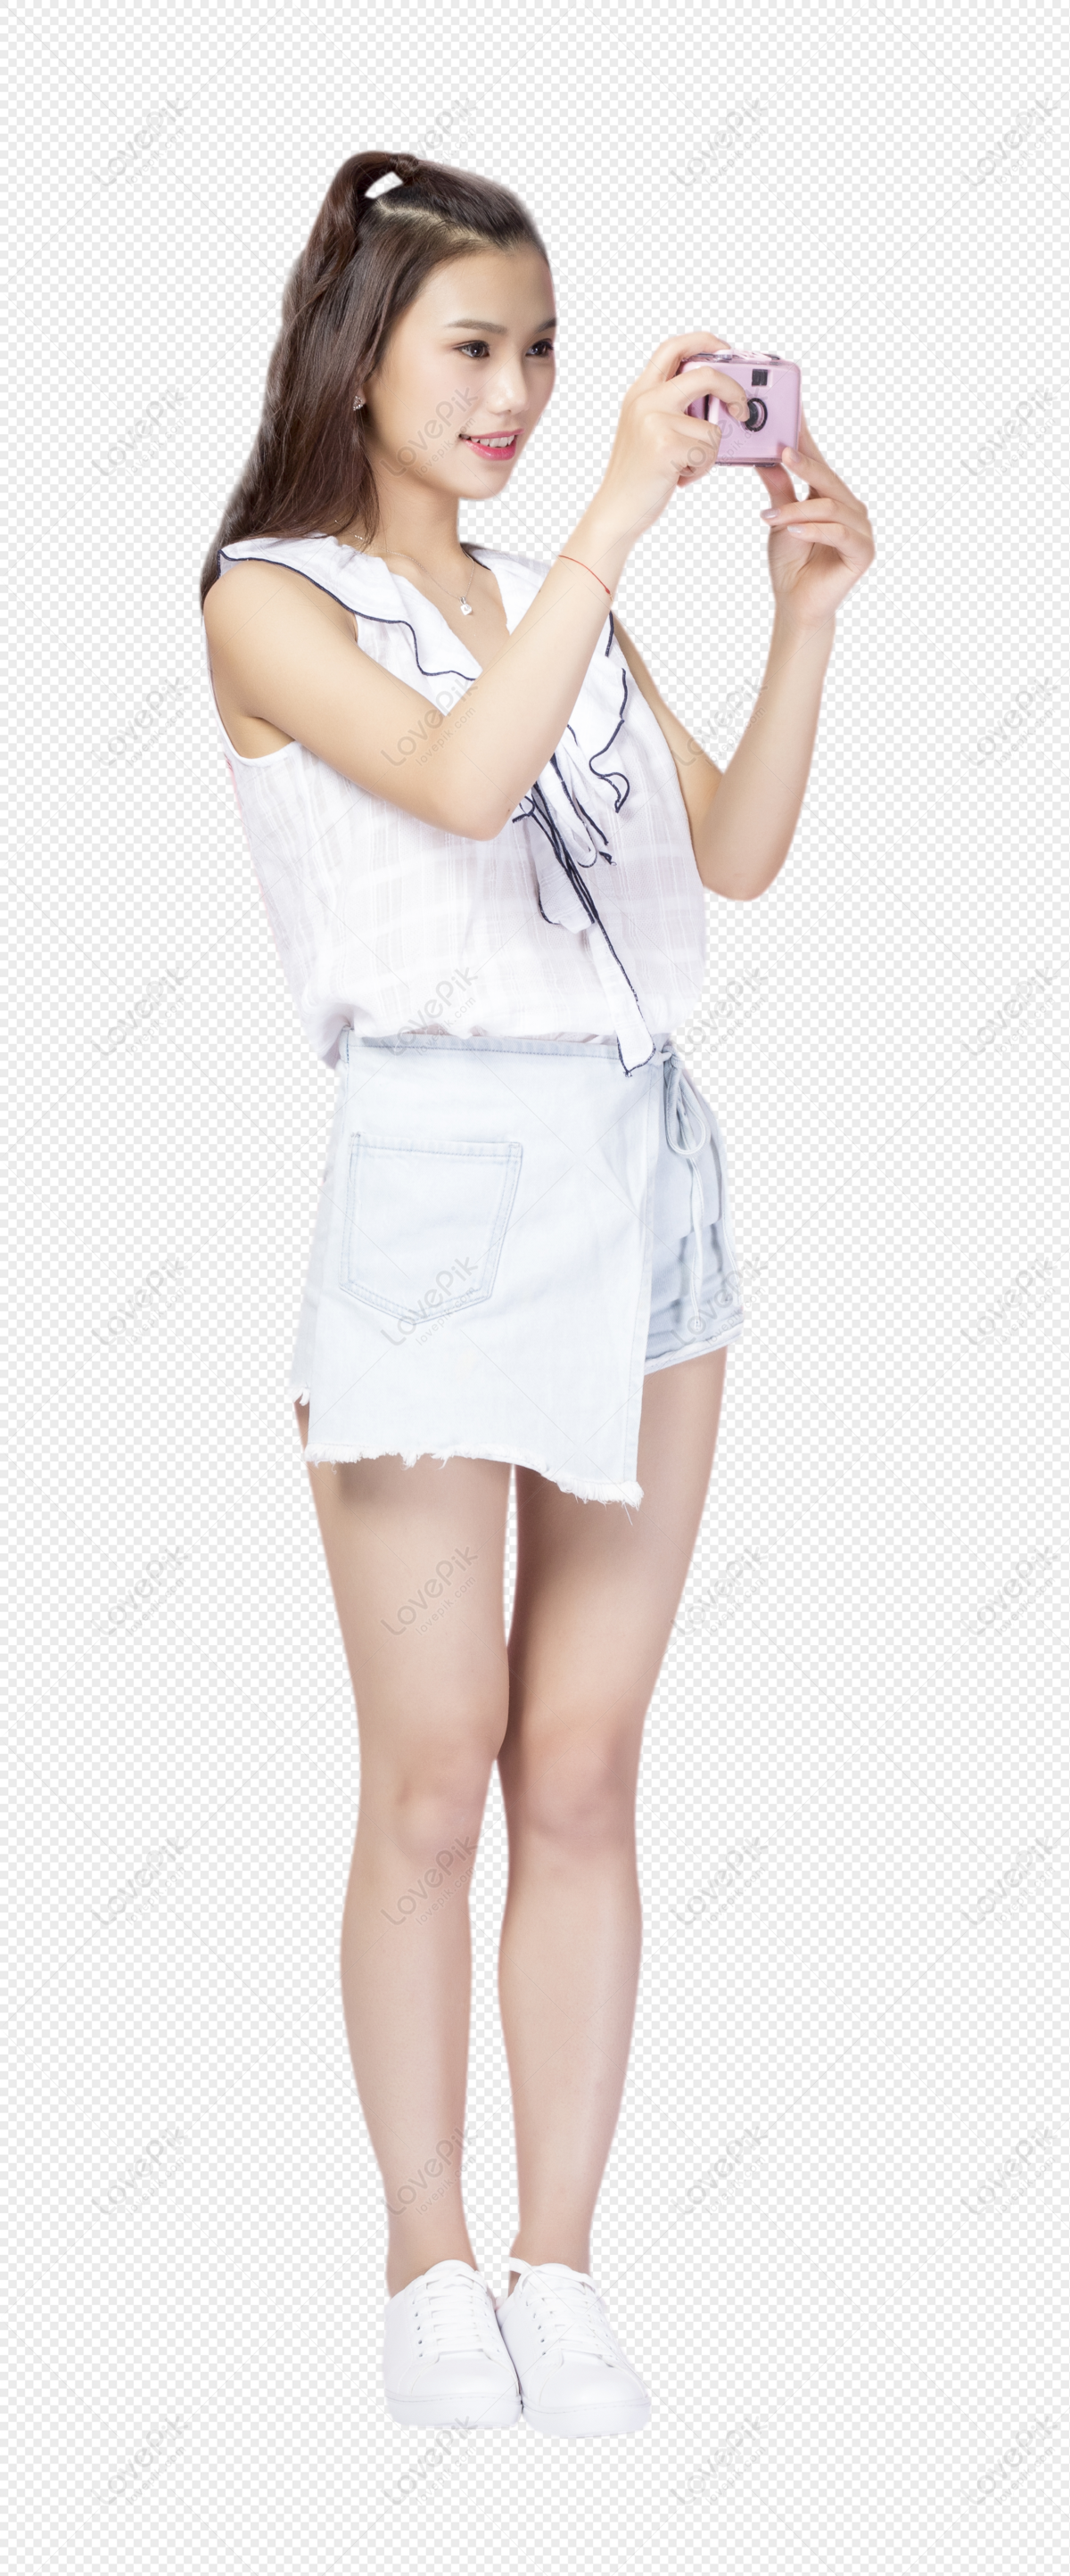 Young Women Taking Pictures PNG Image Free Download And Clipart Image ...